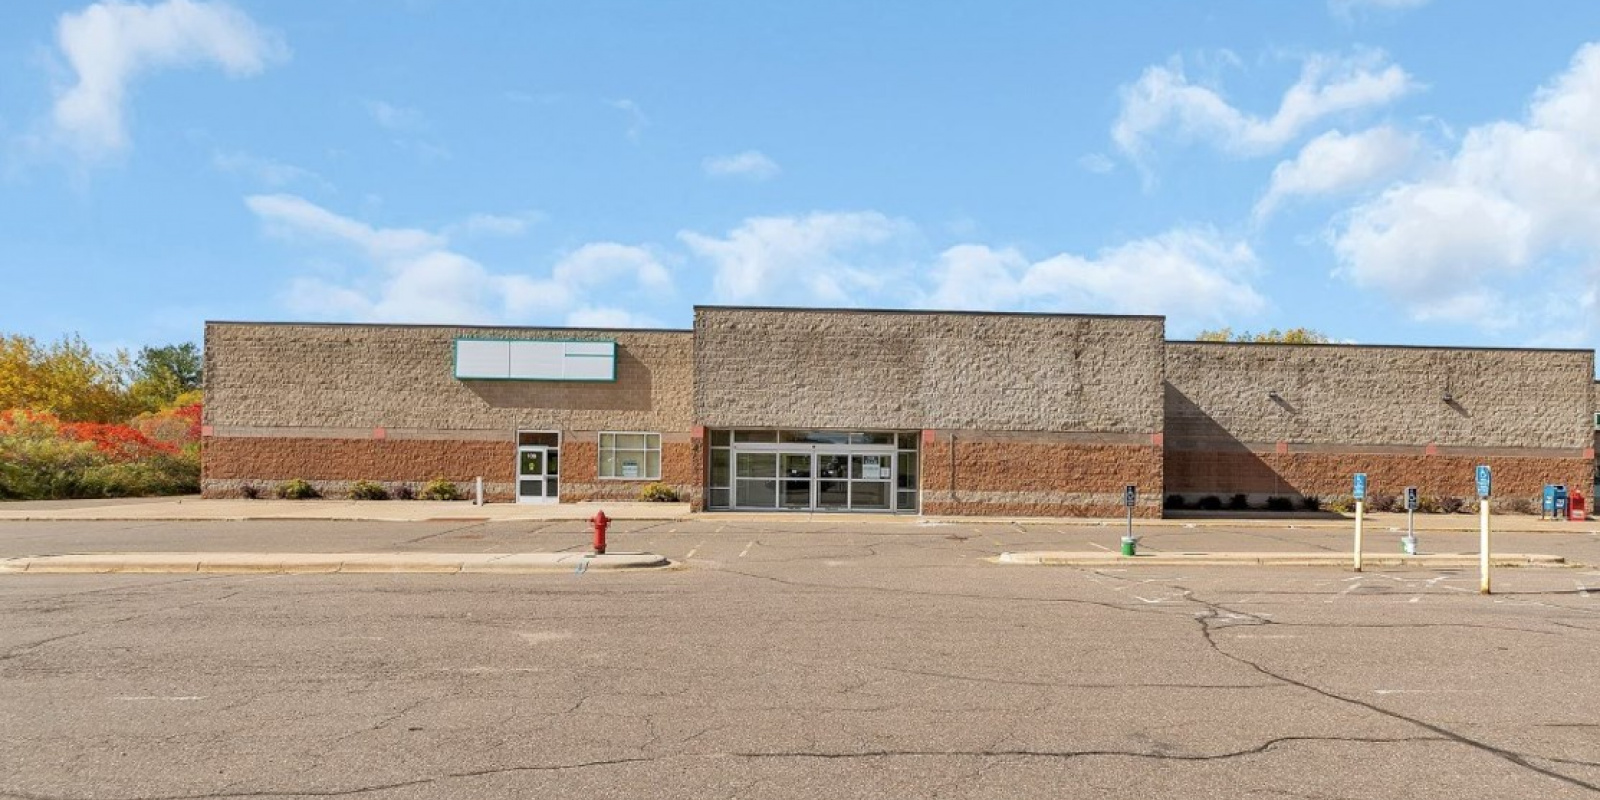 Medical, Retail Office Suite for Lease in Pine City, MN 